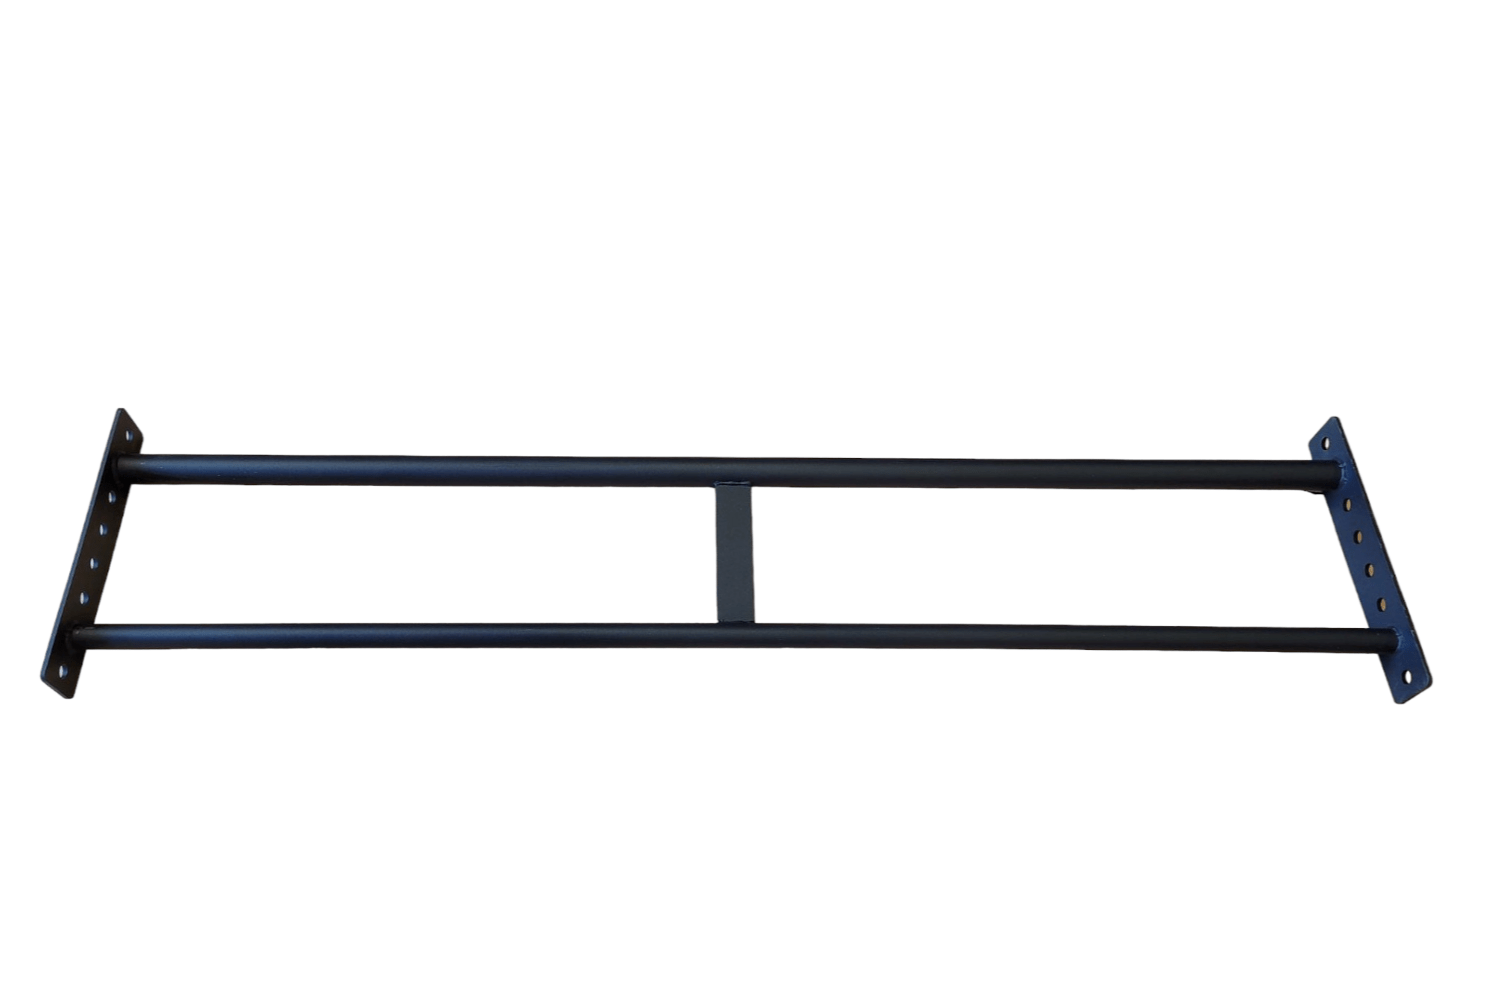 Progression Rig 6 FT Double Parallel Bars-6 FT Double Rig Bar-Progression Fitness-2